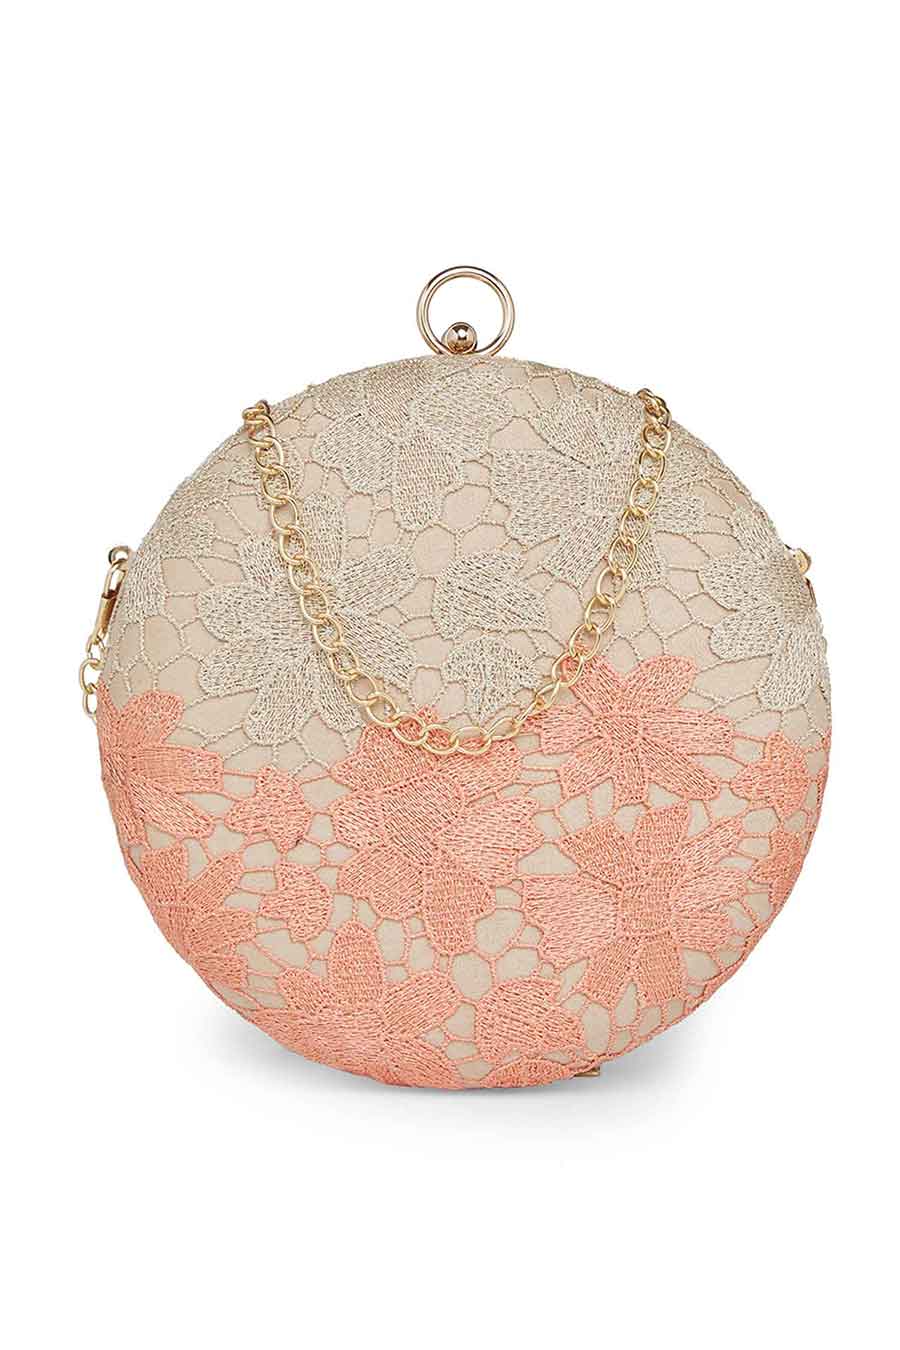 Peach And Gold Lace Clutch